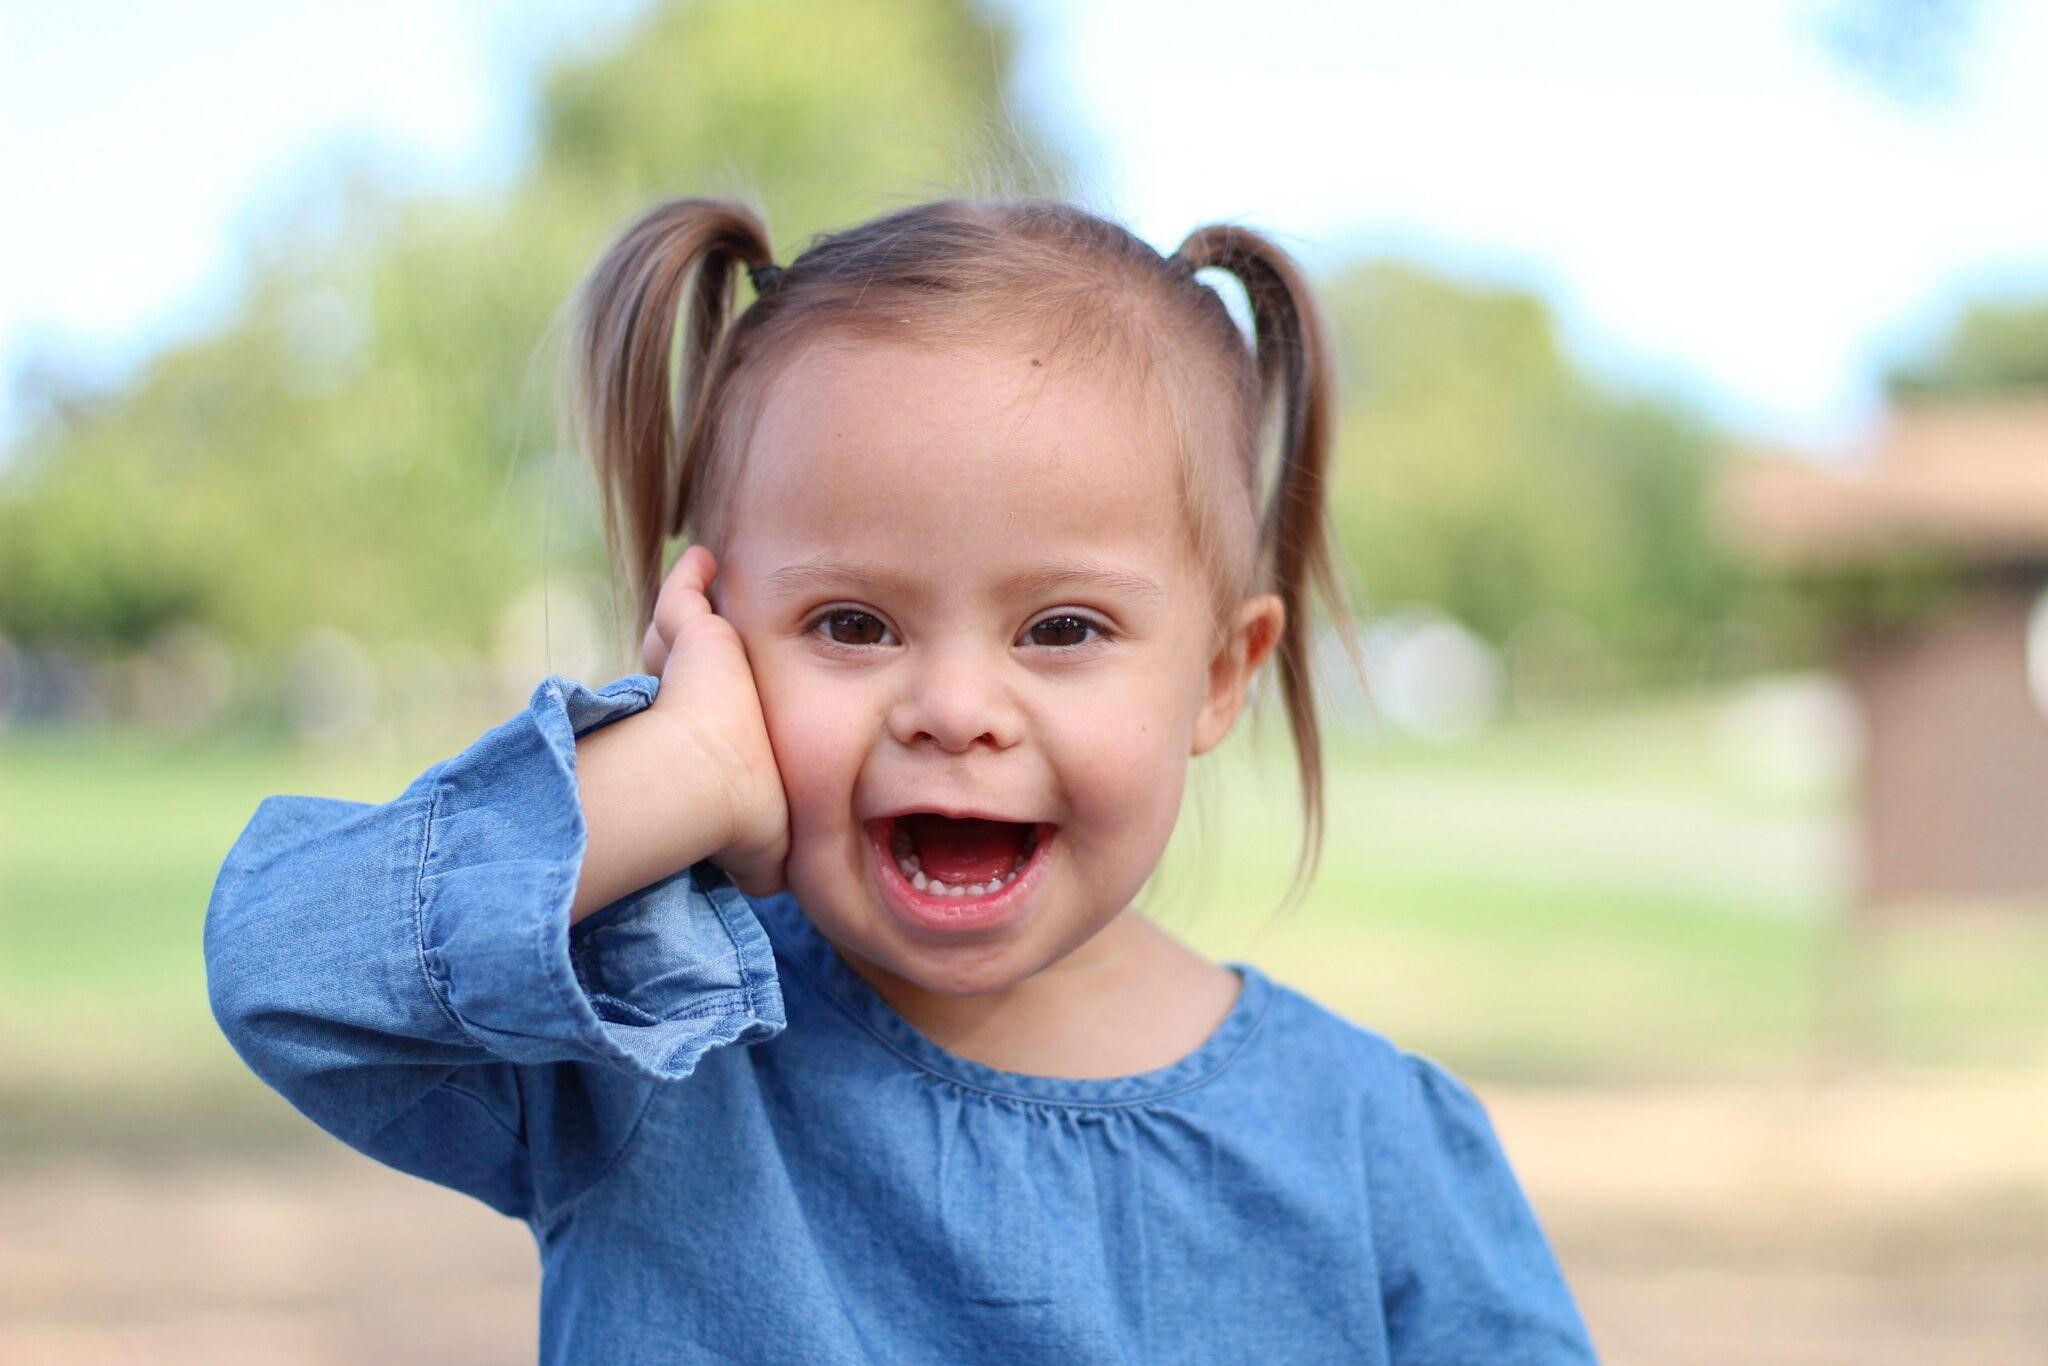 Girl with Down syndrome smiling with her hand on her cheek